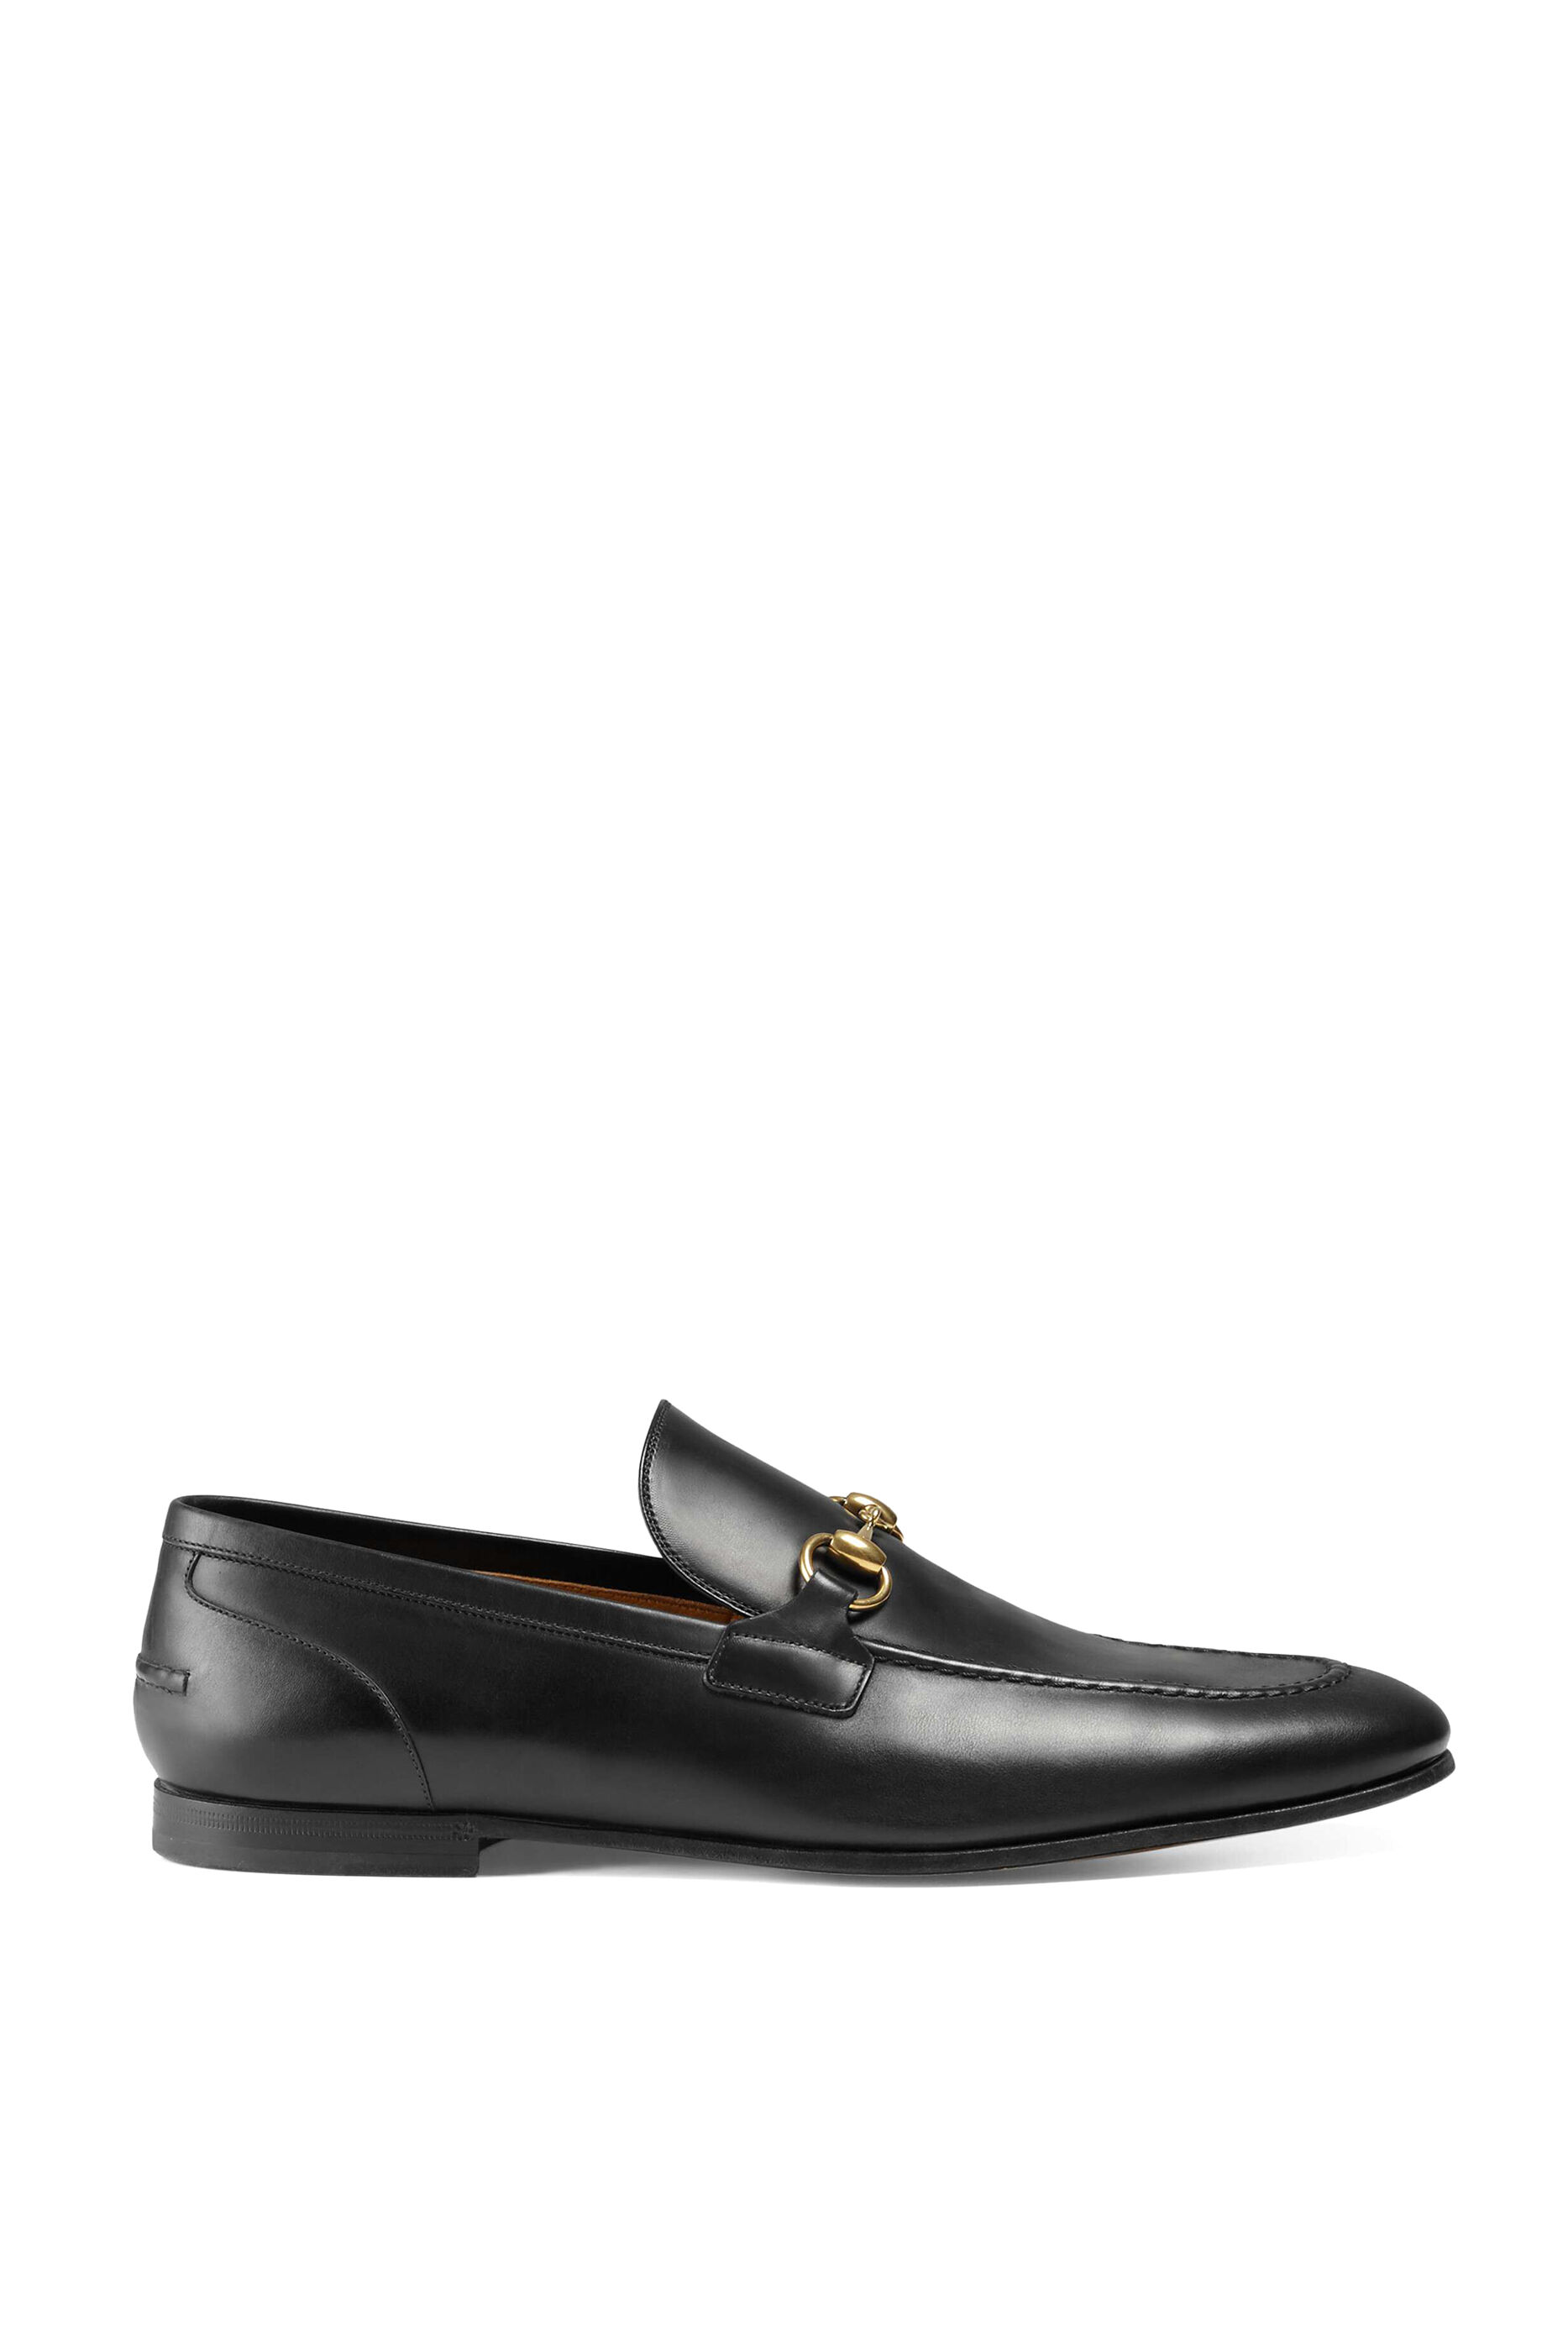 buy gucci loafers